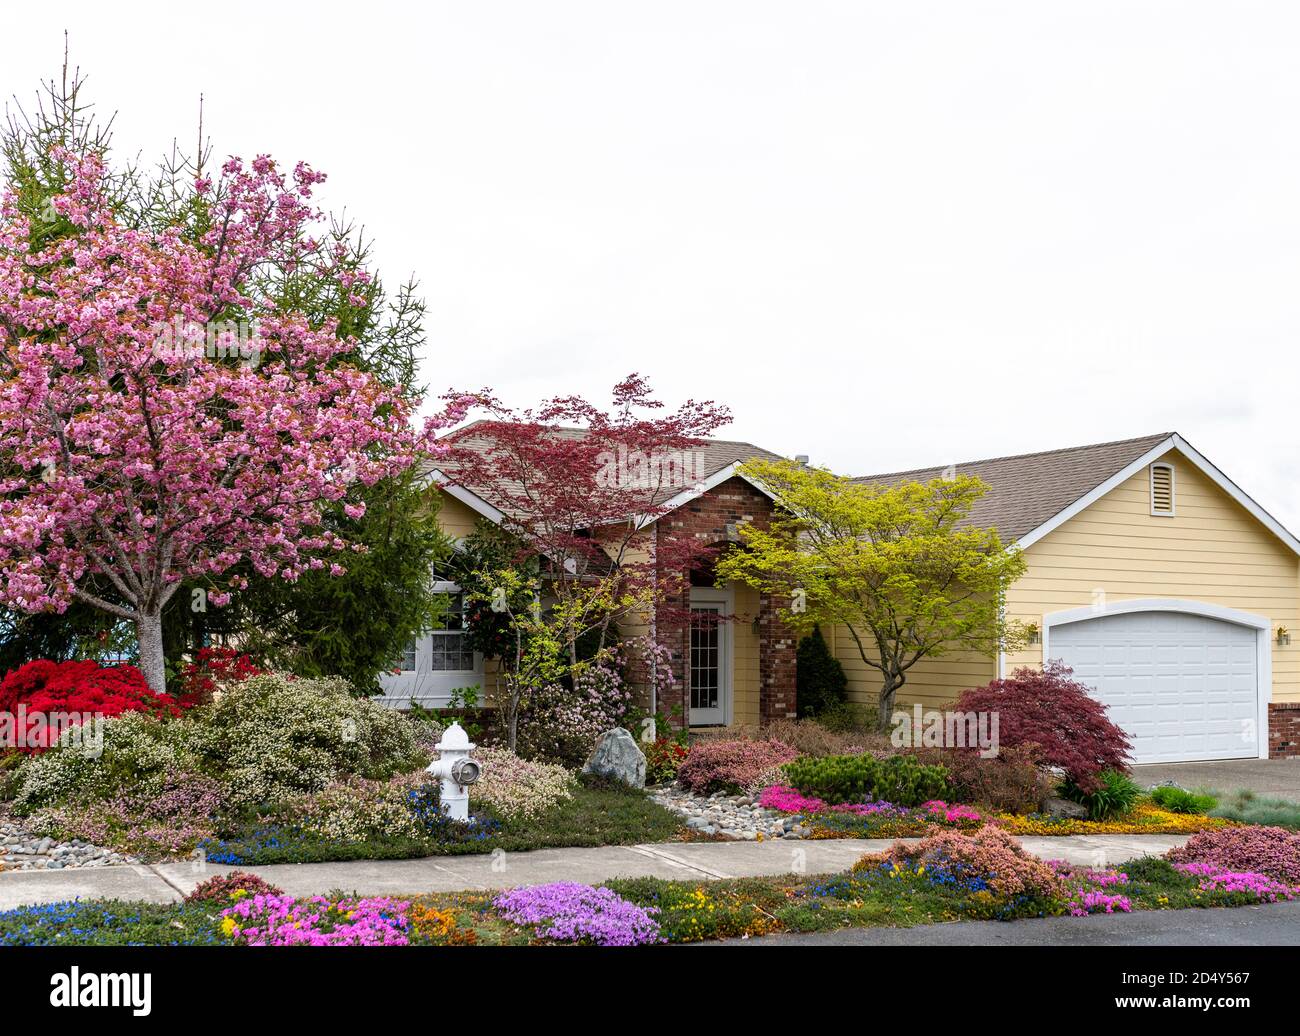 Single family home in America with a natural landscape yard in the spring time Stock Photo